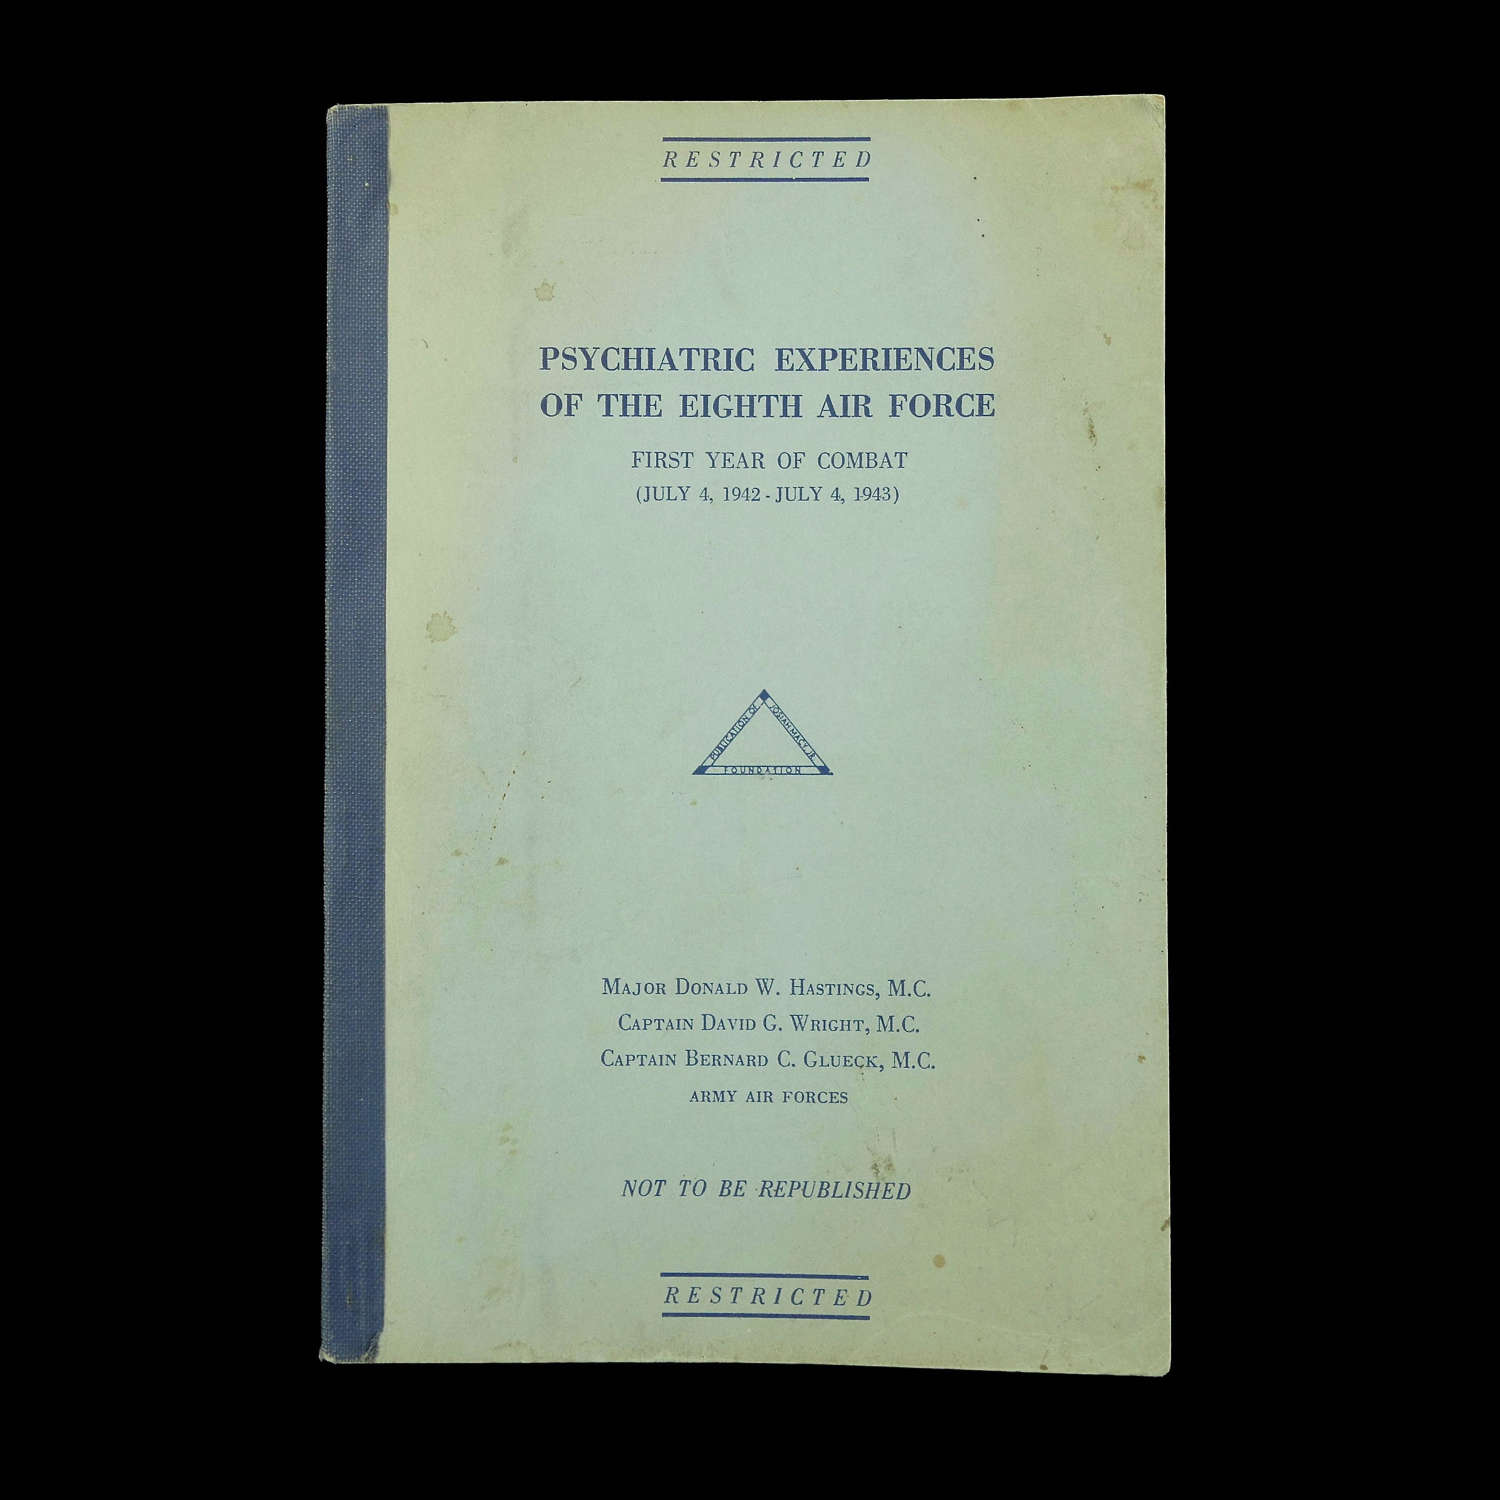 Psychiatric Experiences of the Eighth Air Force, 1944